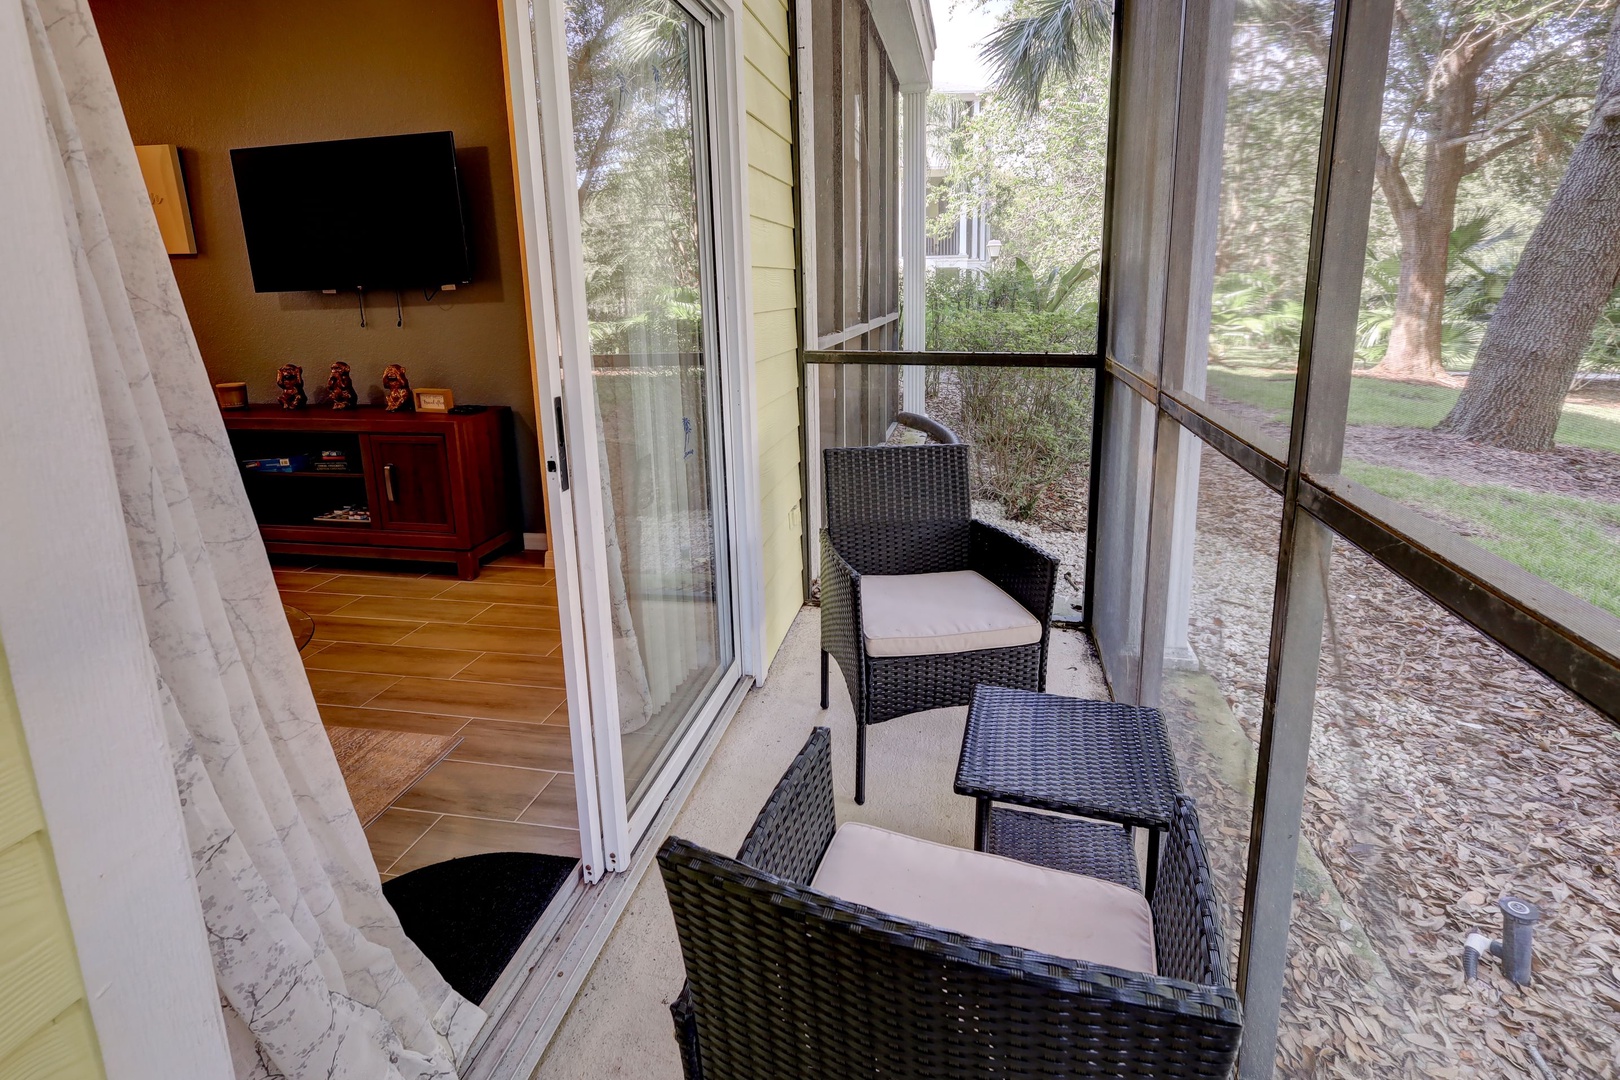 Lounge the day away on the screened-in porch, offering views of the pool